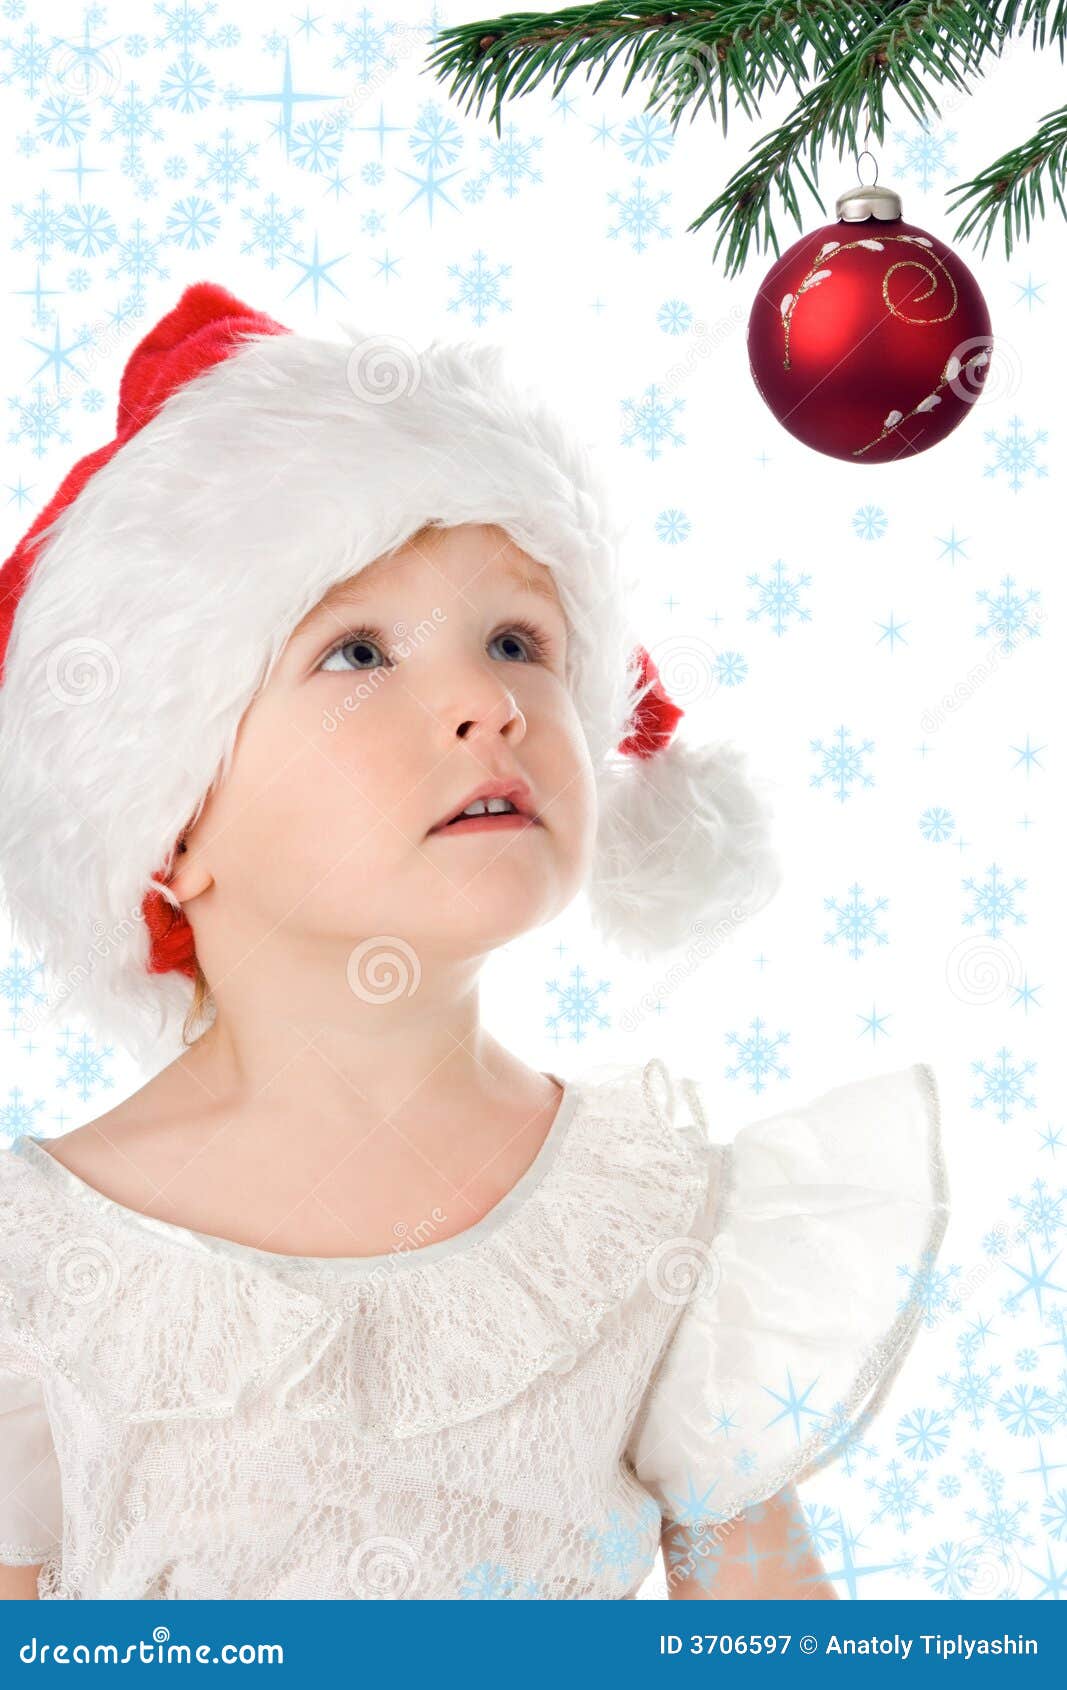 Pretty Baby in Santa Claus Christmas Red Hat Stock Image - Image of ...